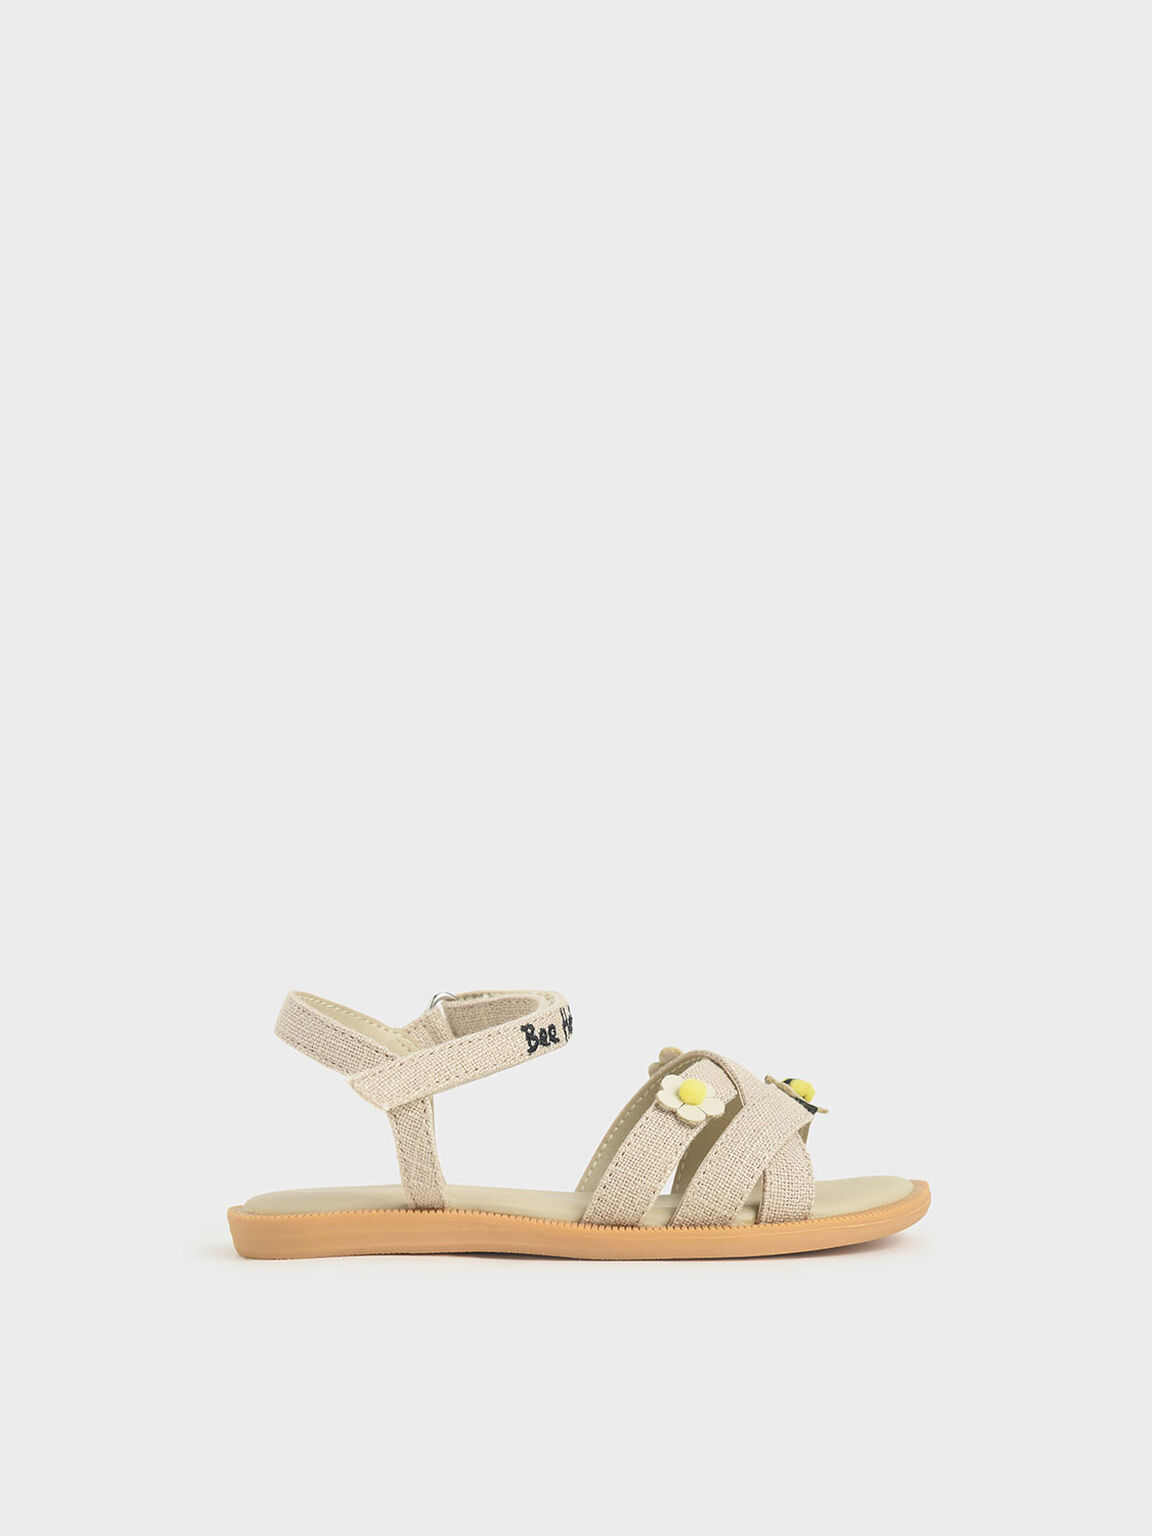 The Purpose Collection - Girls' Bee Flat Sandals, Beige, hi-res